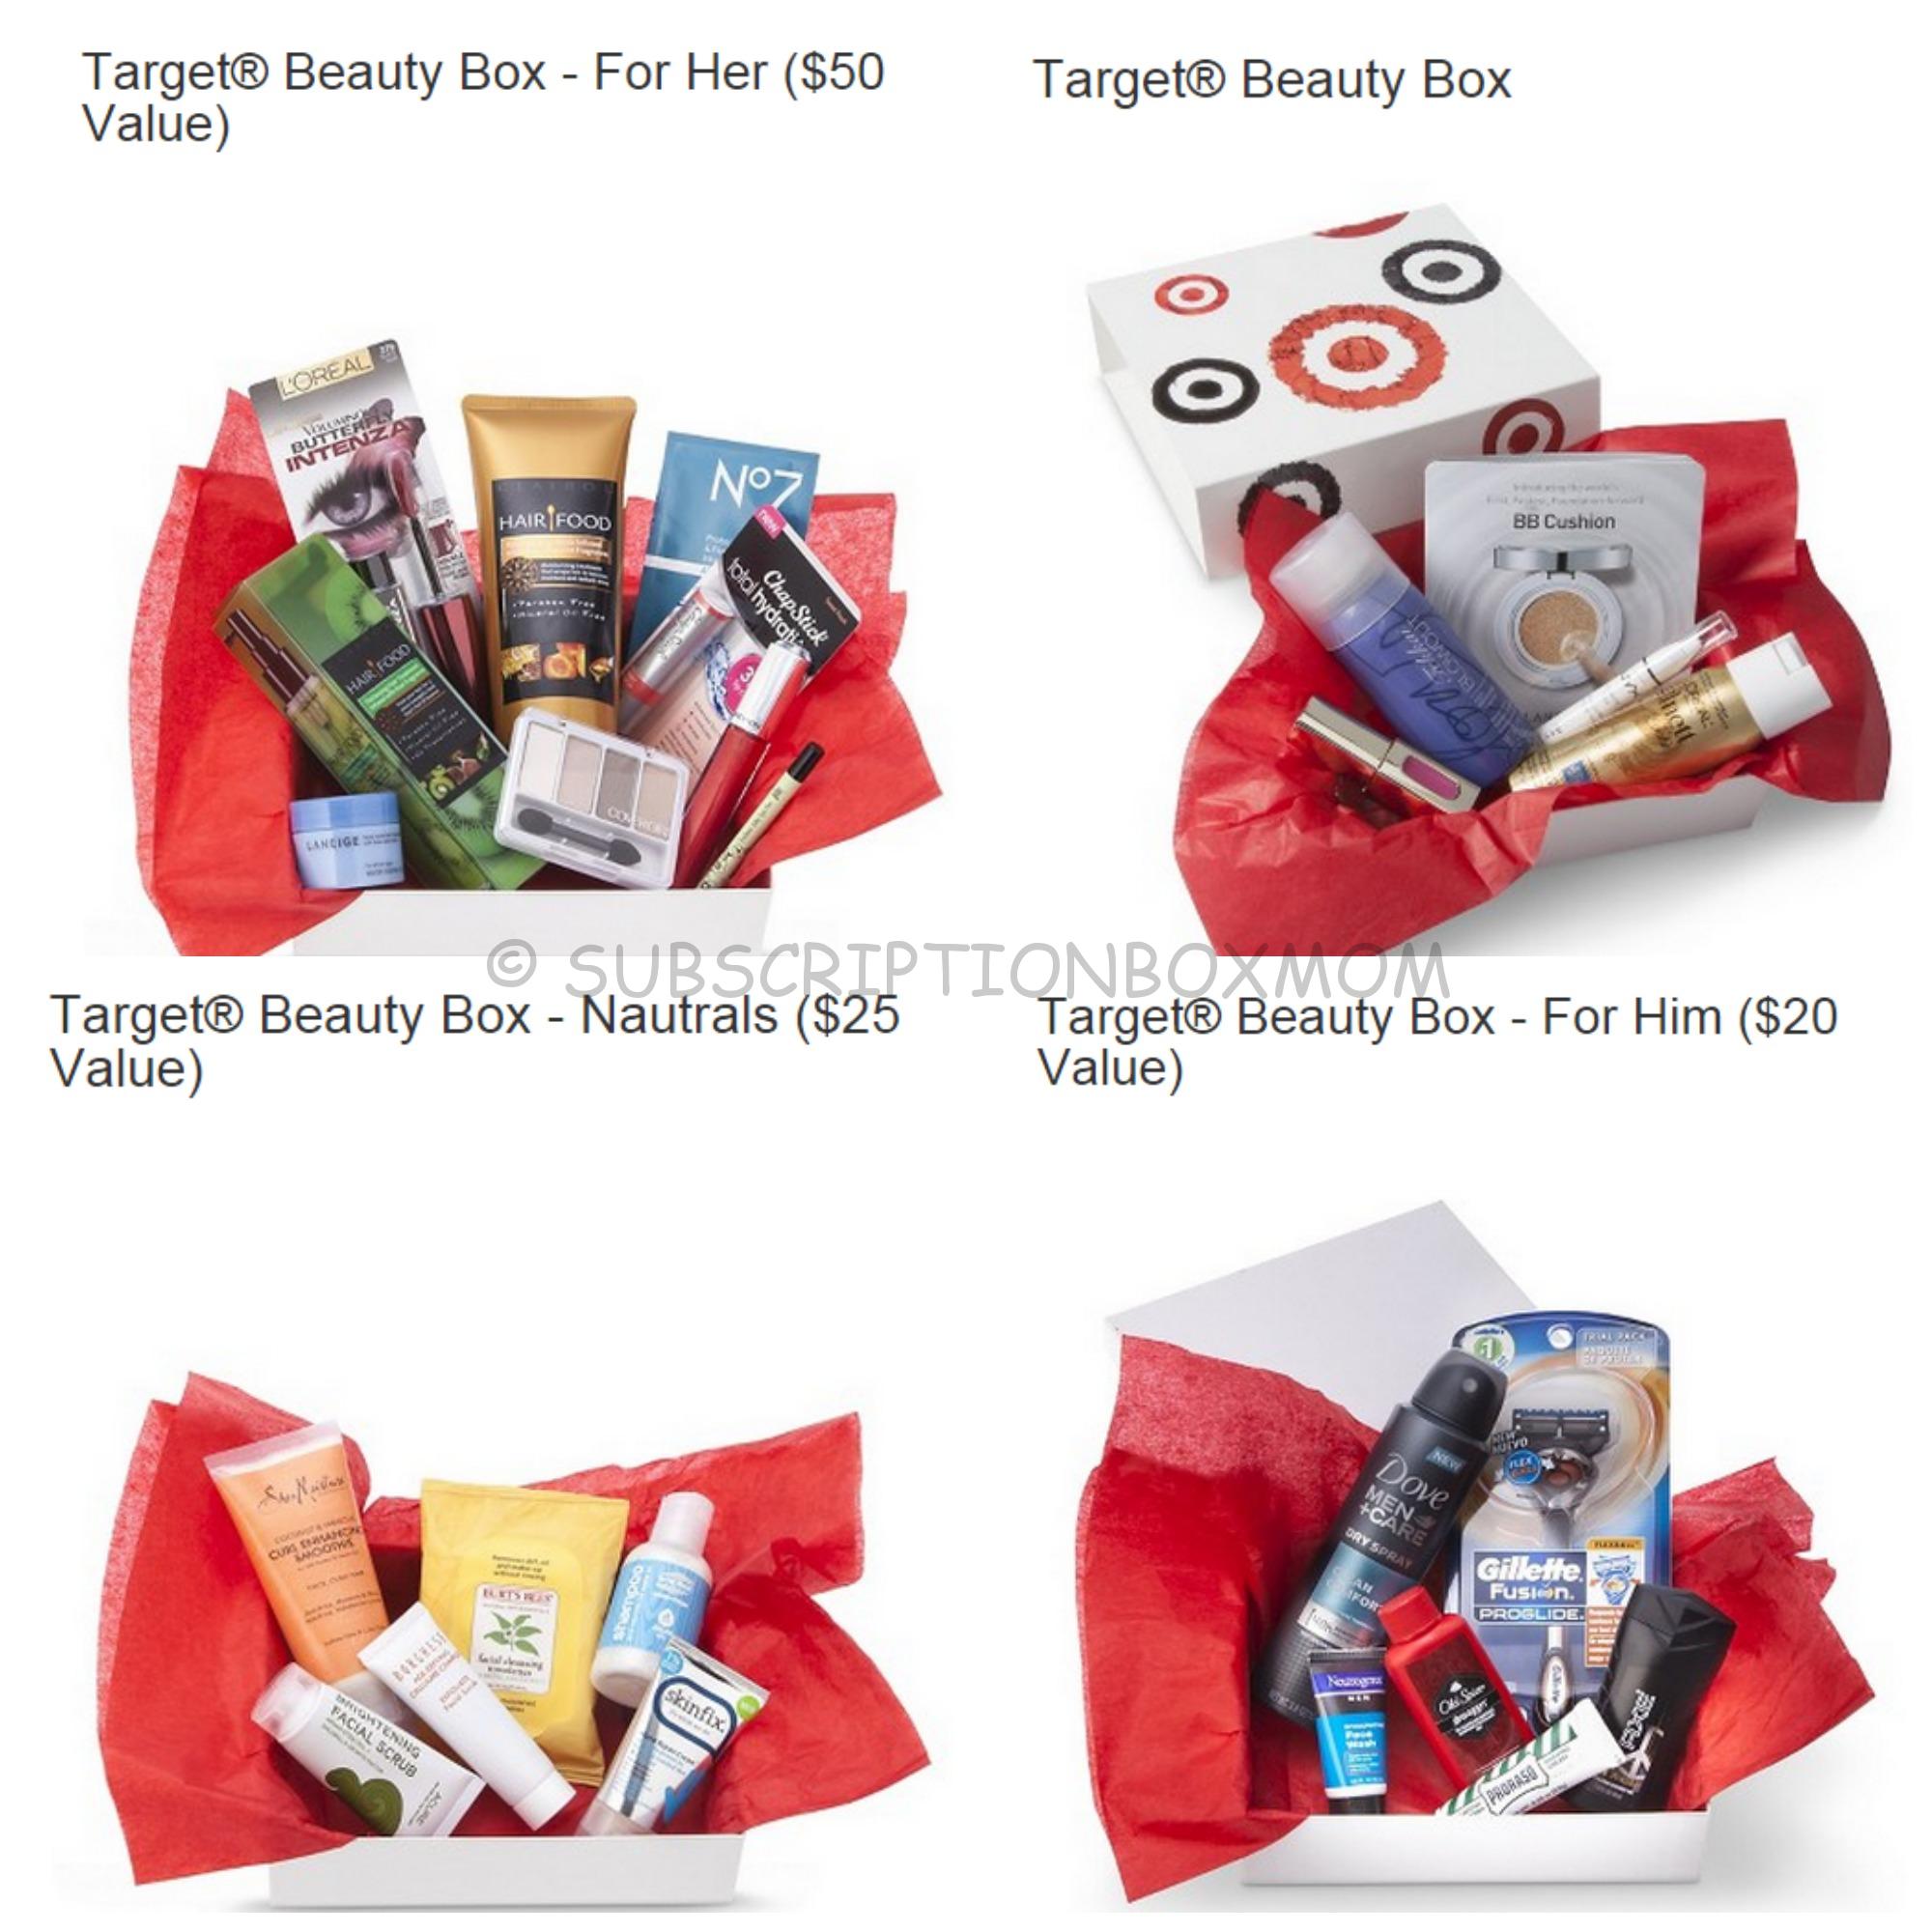 Target Mystery Boxes: Cyber Monday Deal 2014